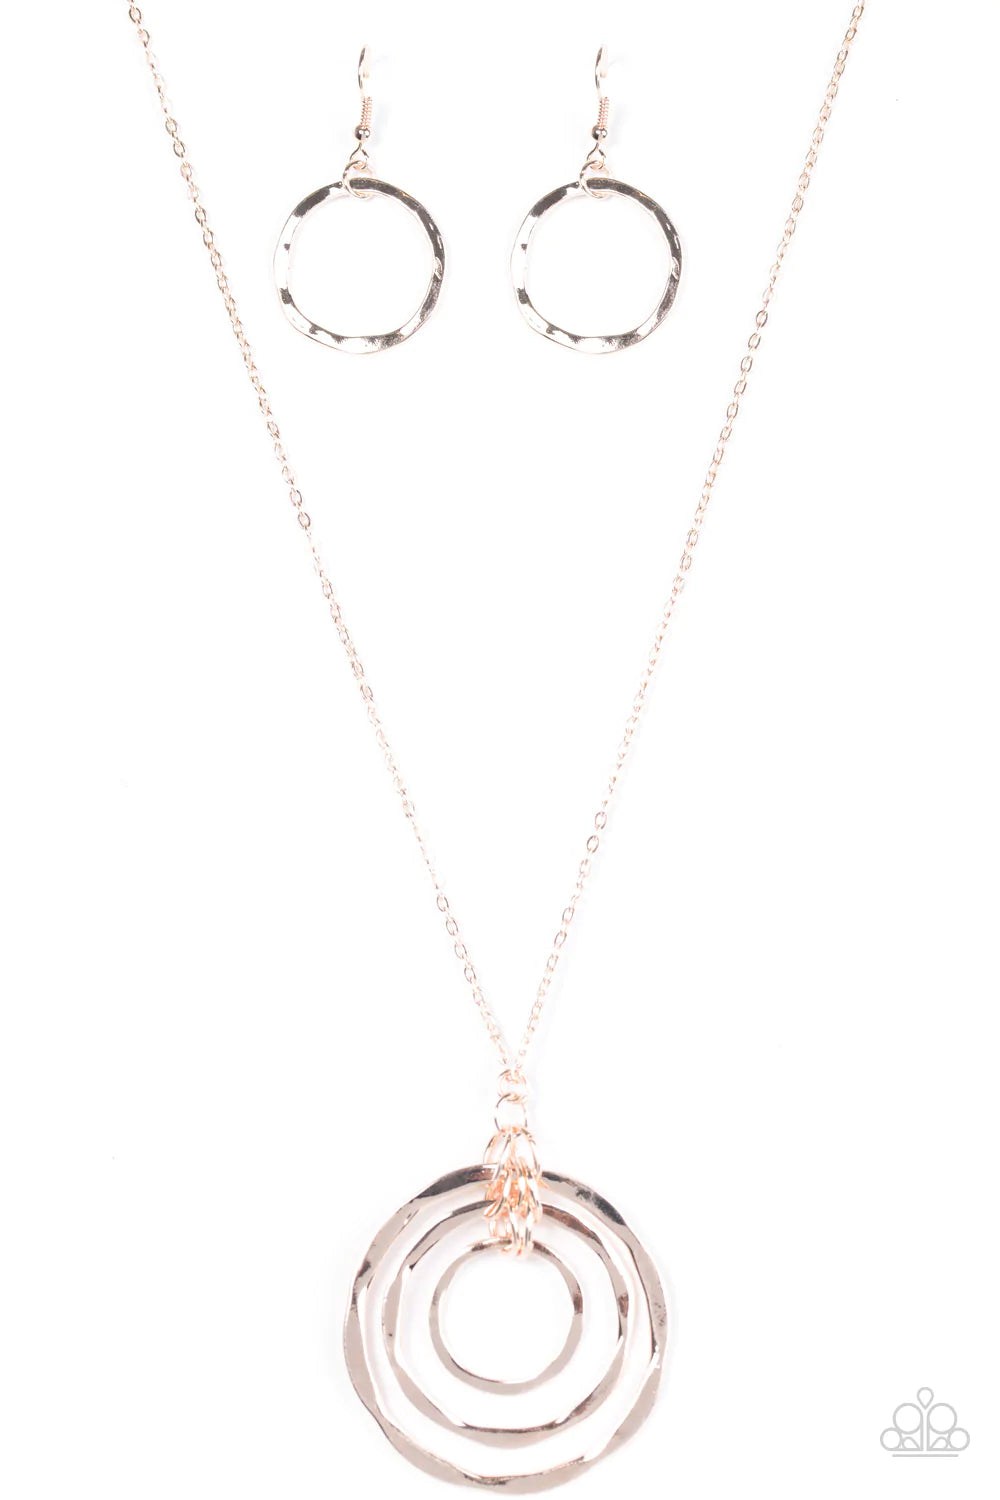 Paparazzi Necklace ~ Full Eclipse - Rose Gold